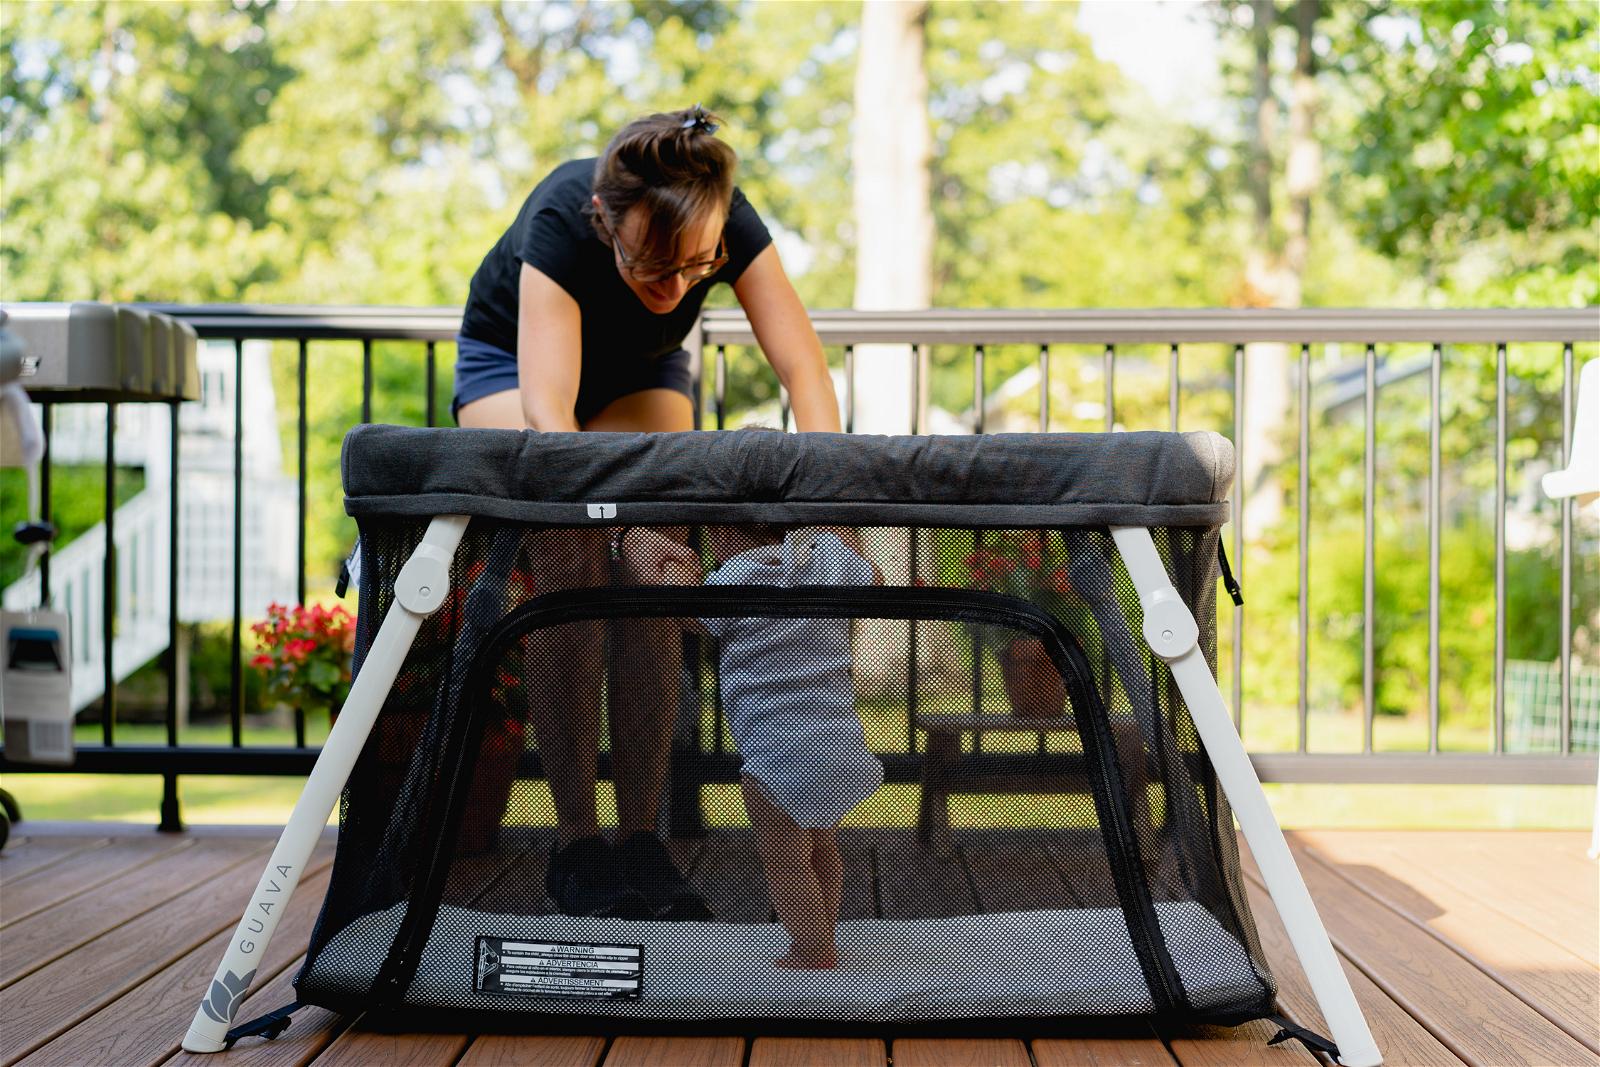 Guava Lotus Travel Crib Review: Best for a family trip?